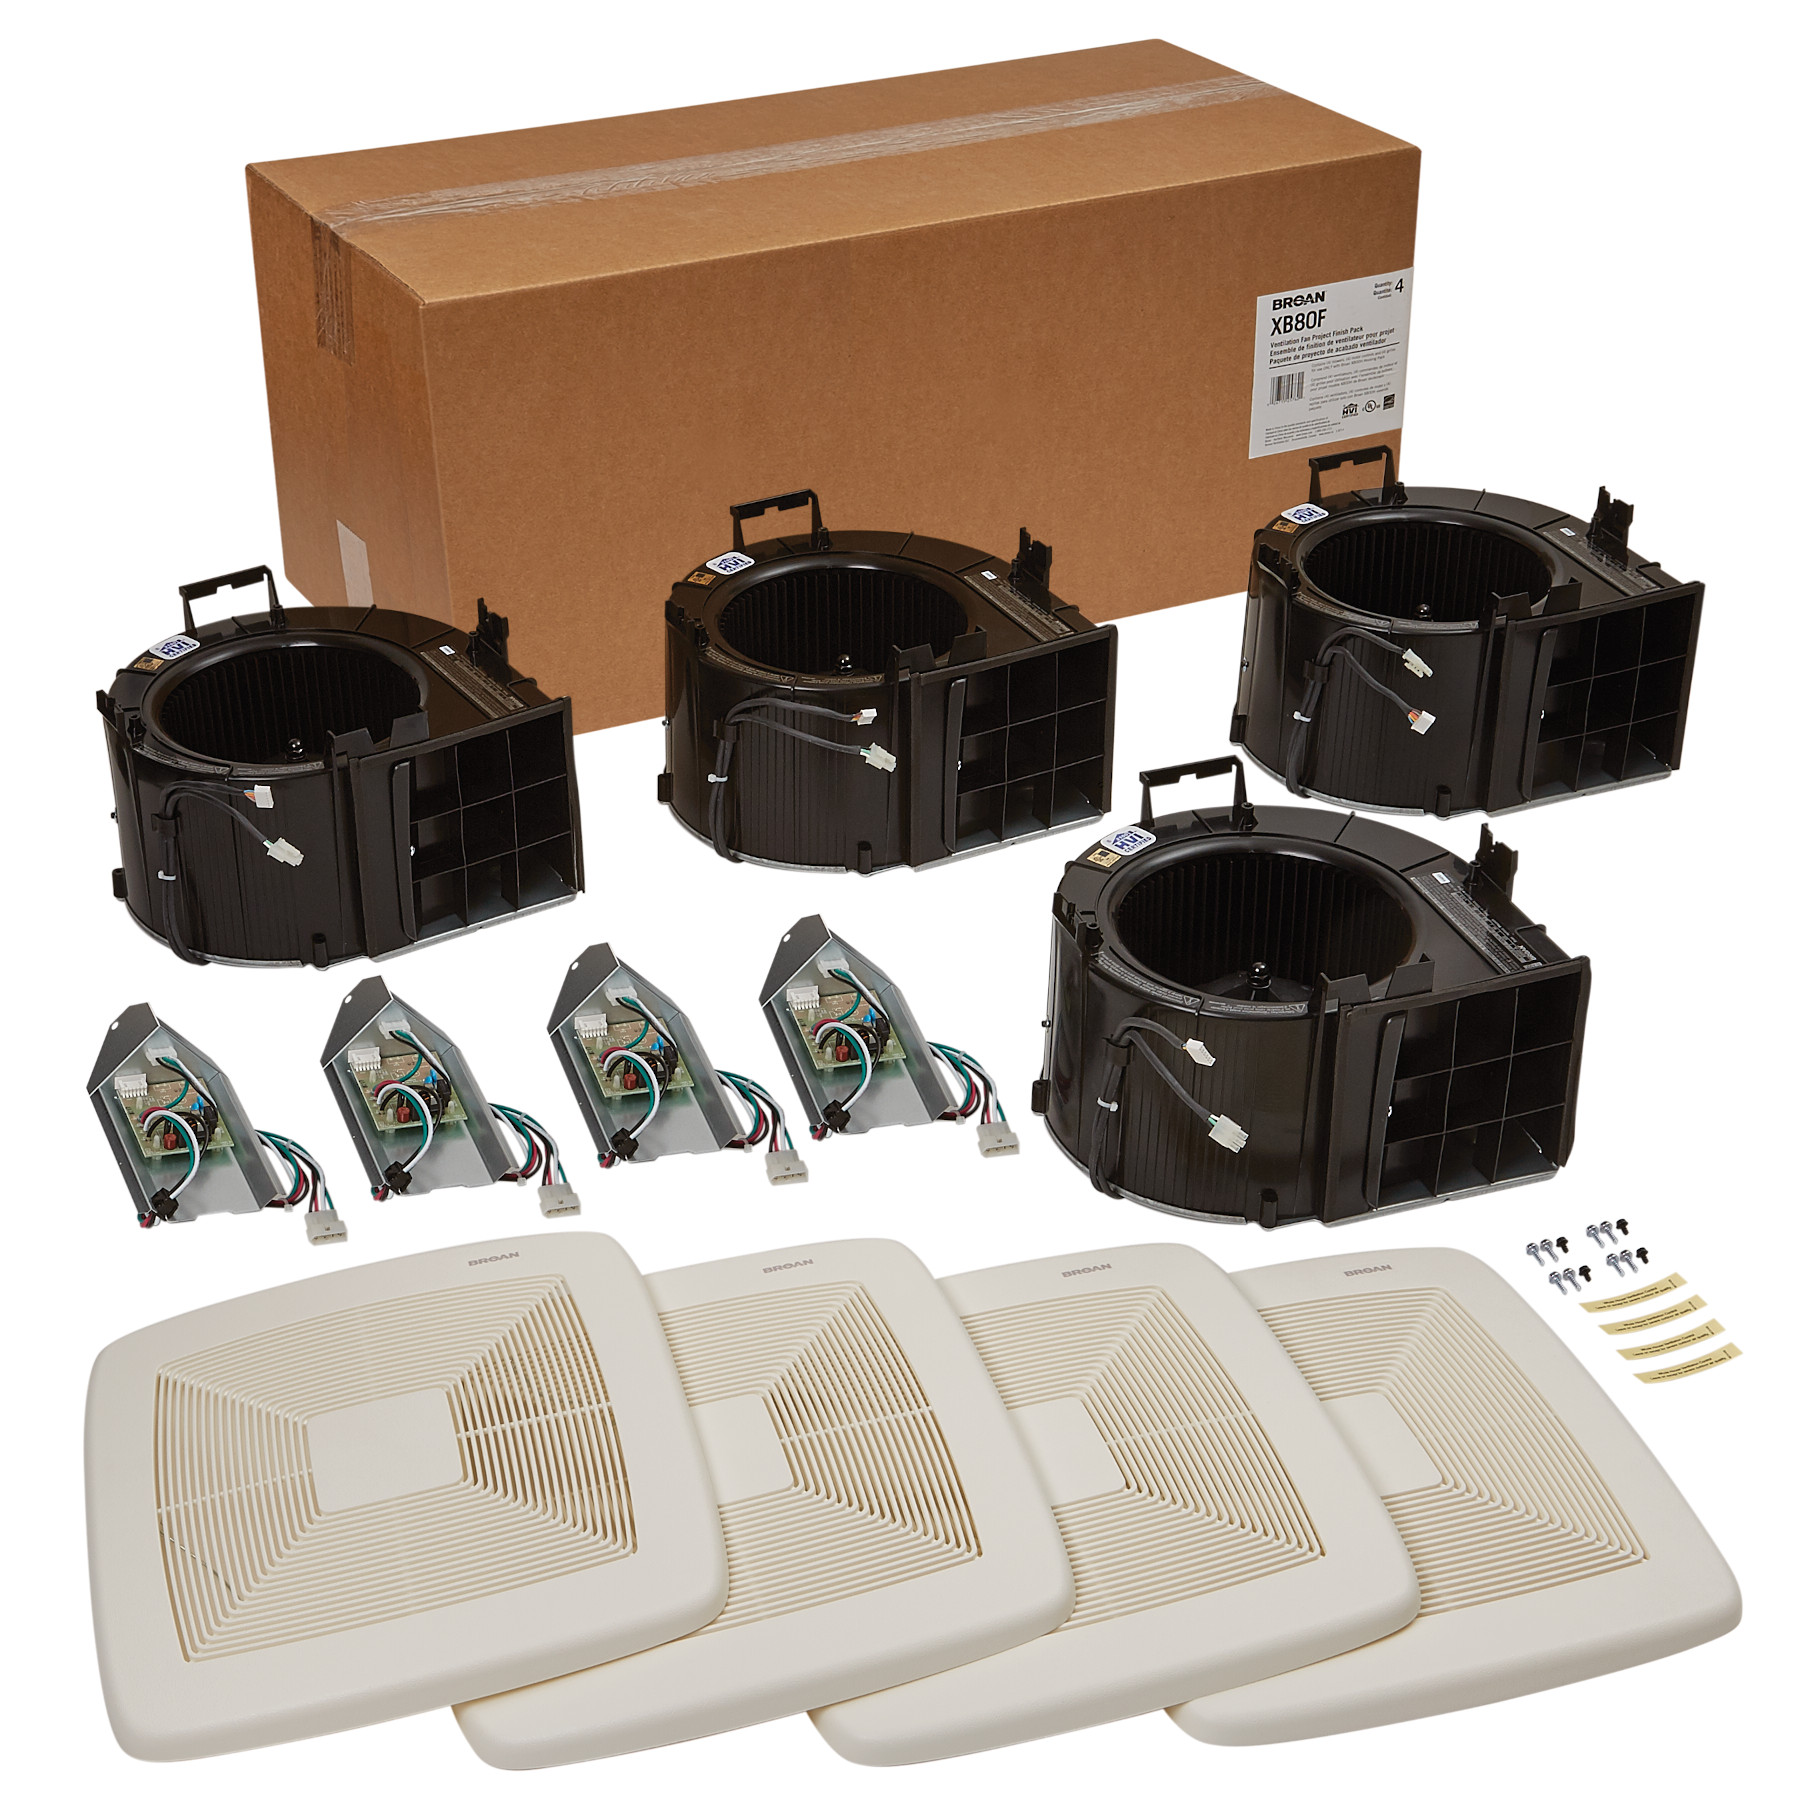 **DISCONTINUED** Broan® Exhaust Ventilation Fan Finish Pack, 80 CFM, ENERGY STAR® certified